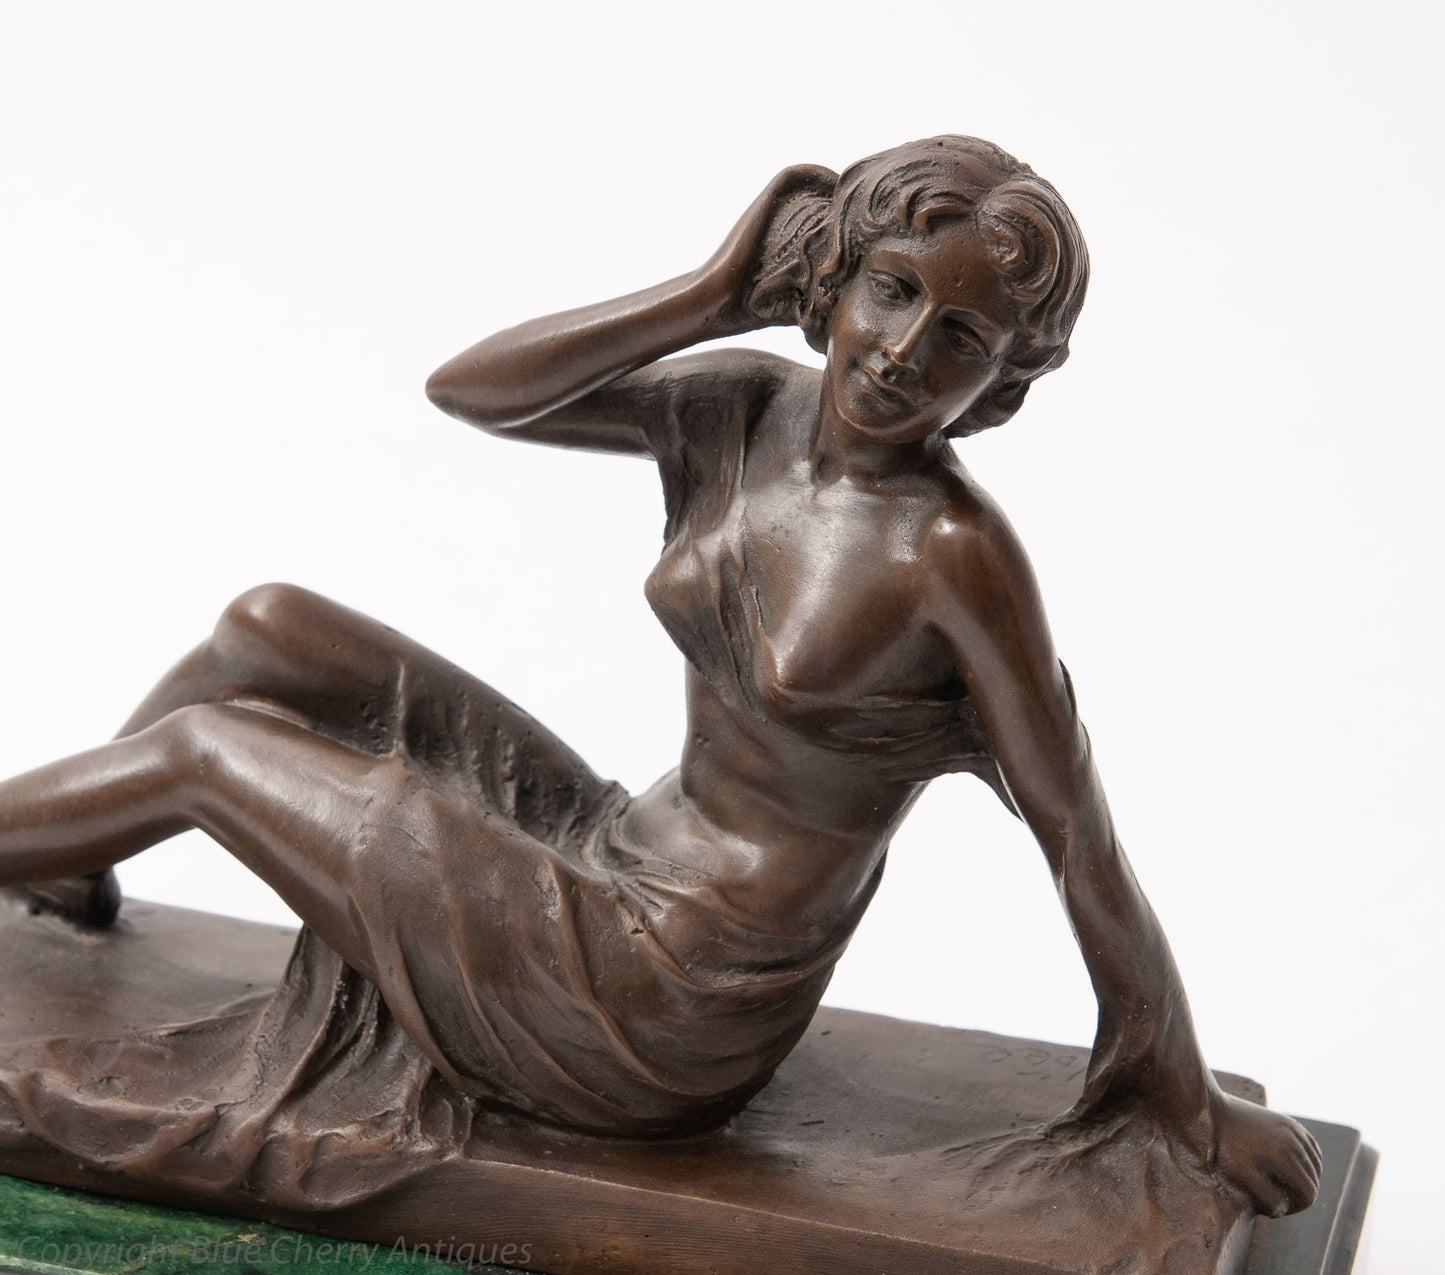 Art Deco Design Patinated Bronze Figure of Reclining Female on Green Marble Base (Code 1578)